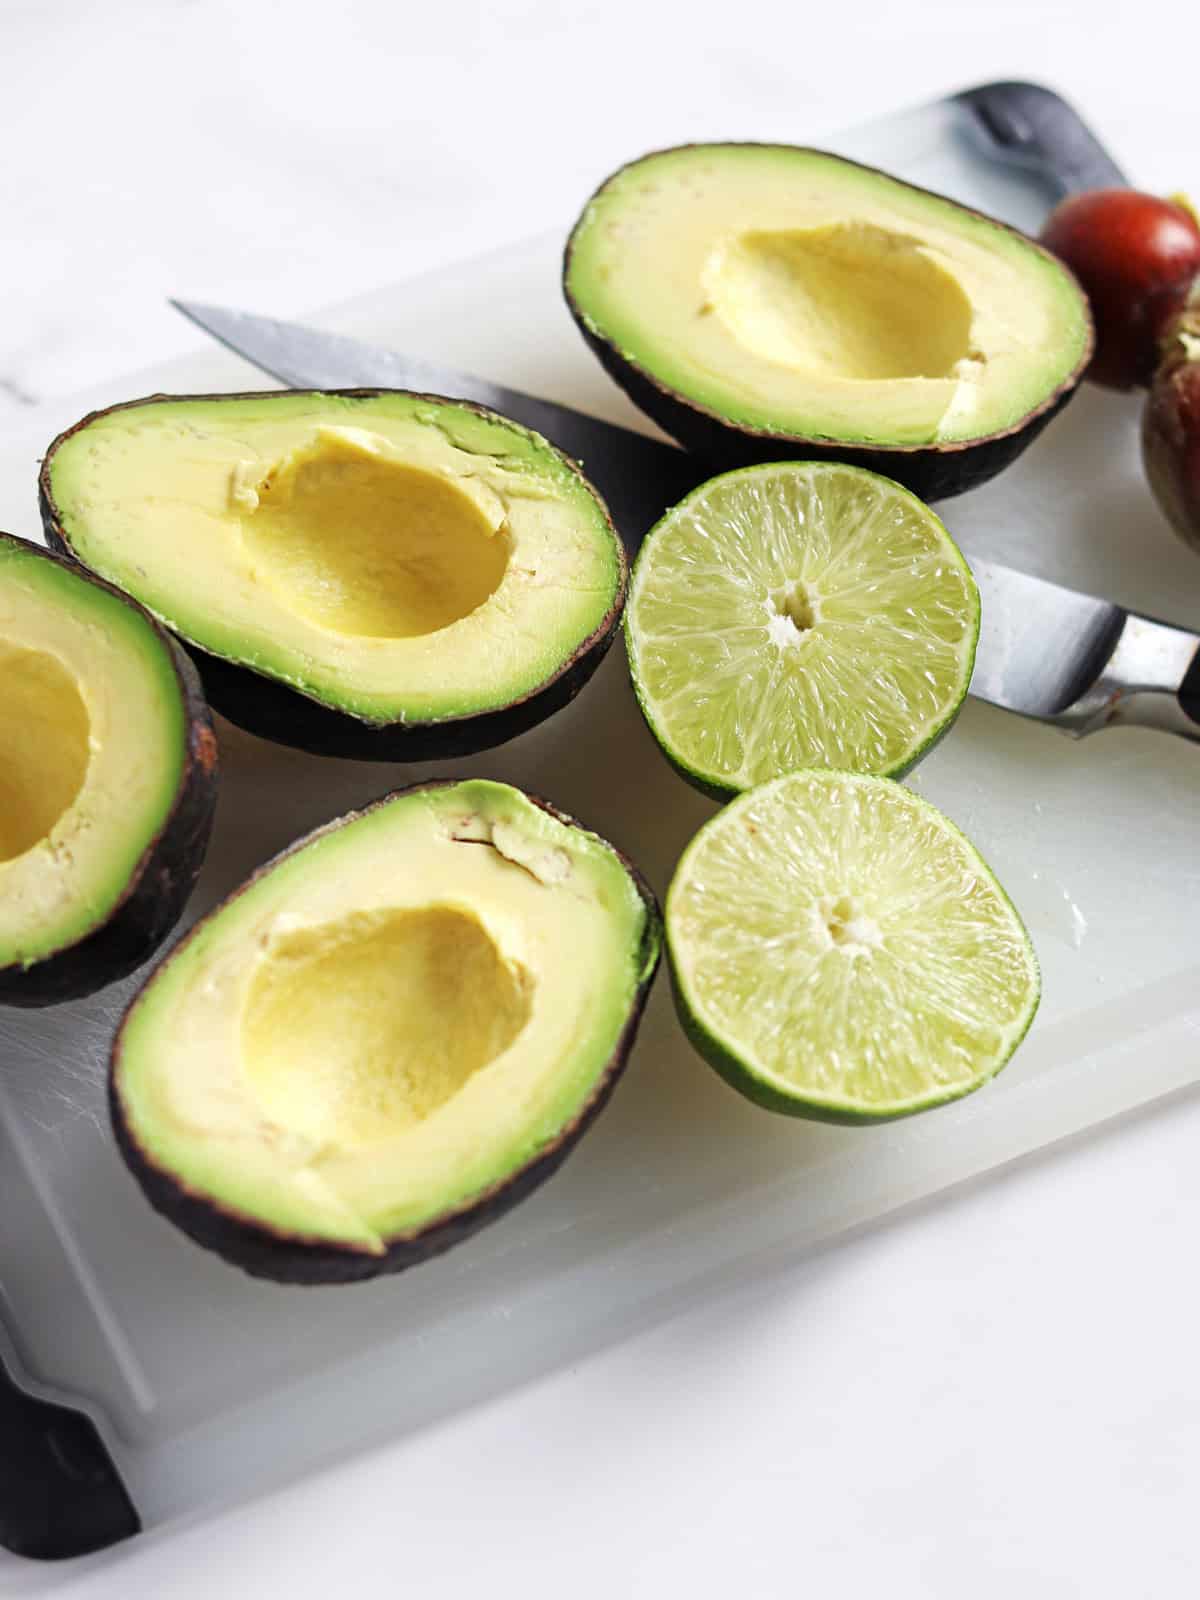 Halved avocados and a halved lime with a sharp knife on a white and black cutting board.